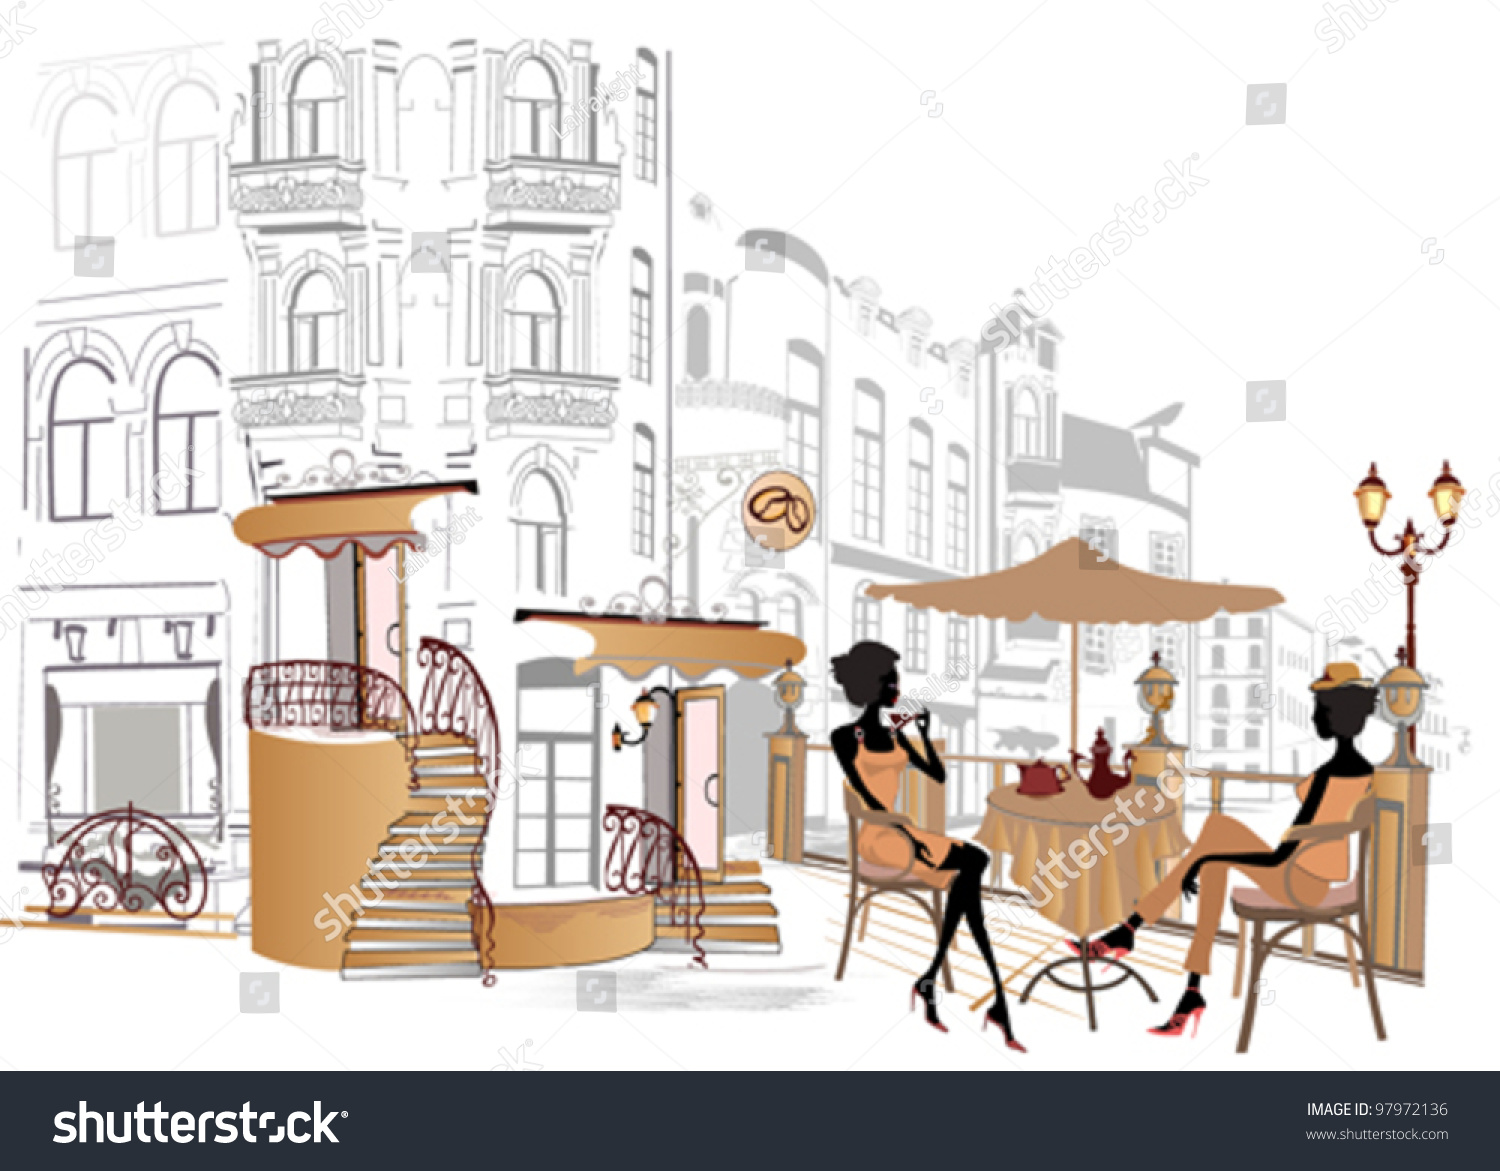 Girls Drinking Coffee In The Street Cafe Stock Vector Illustration ...